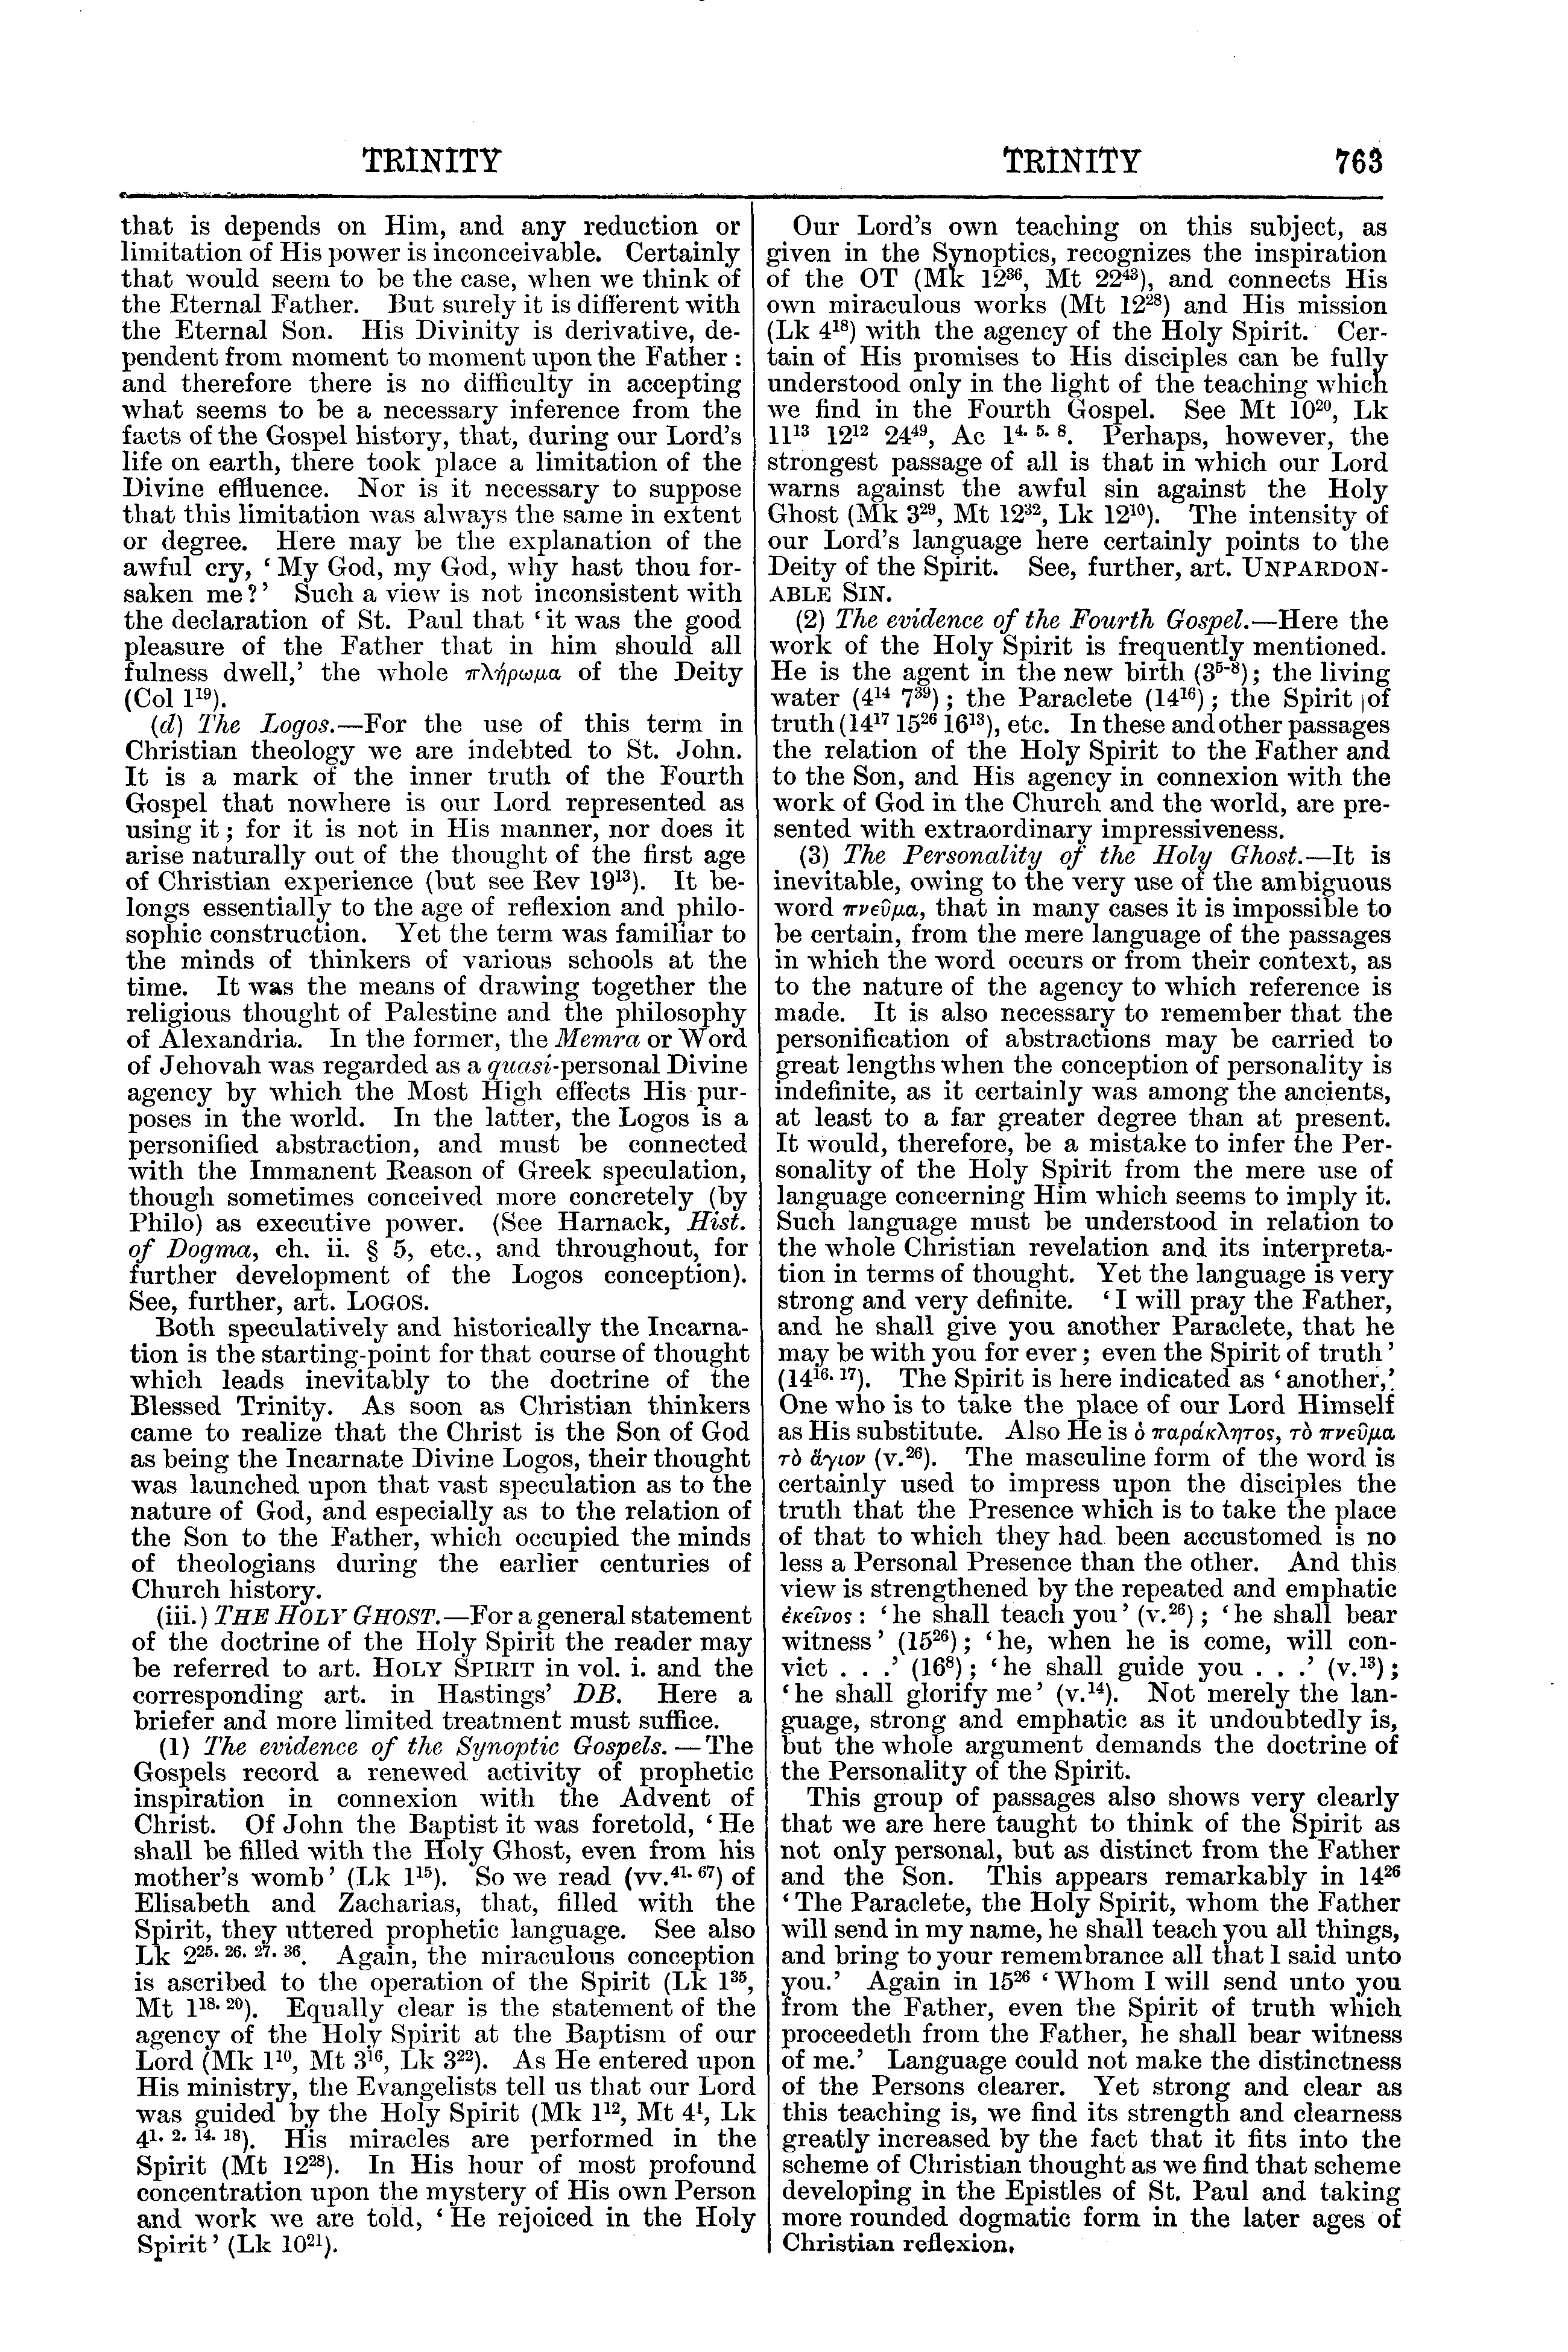 Image of page 763